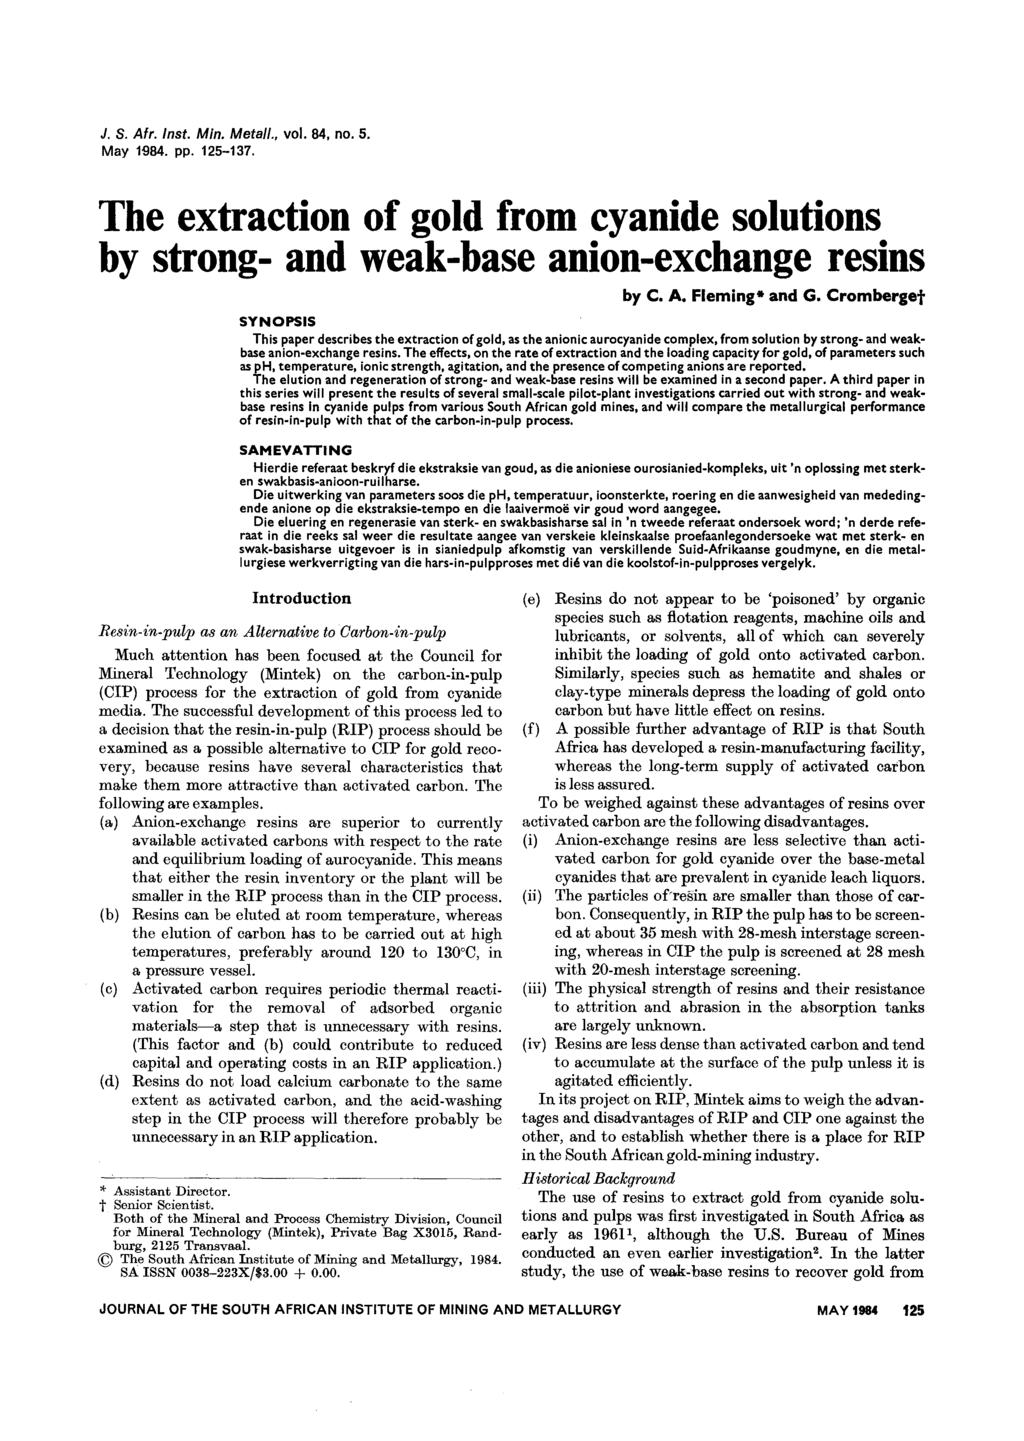 J. S. Atr. Inst. Min. Metal/., vo!. 84, no. 5. May 1984. pp. 125-137. The extration of gold from yanide solutions by strong- and weak-base anion-exhange resins by C. A. Fleming* and G.